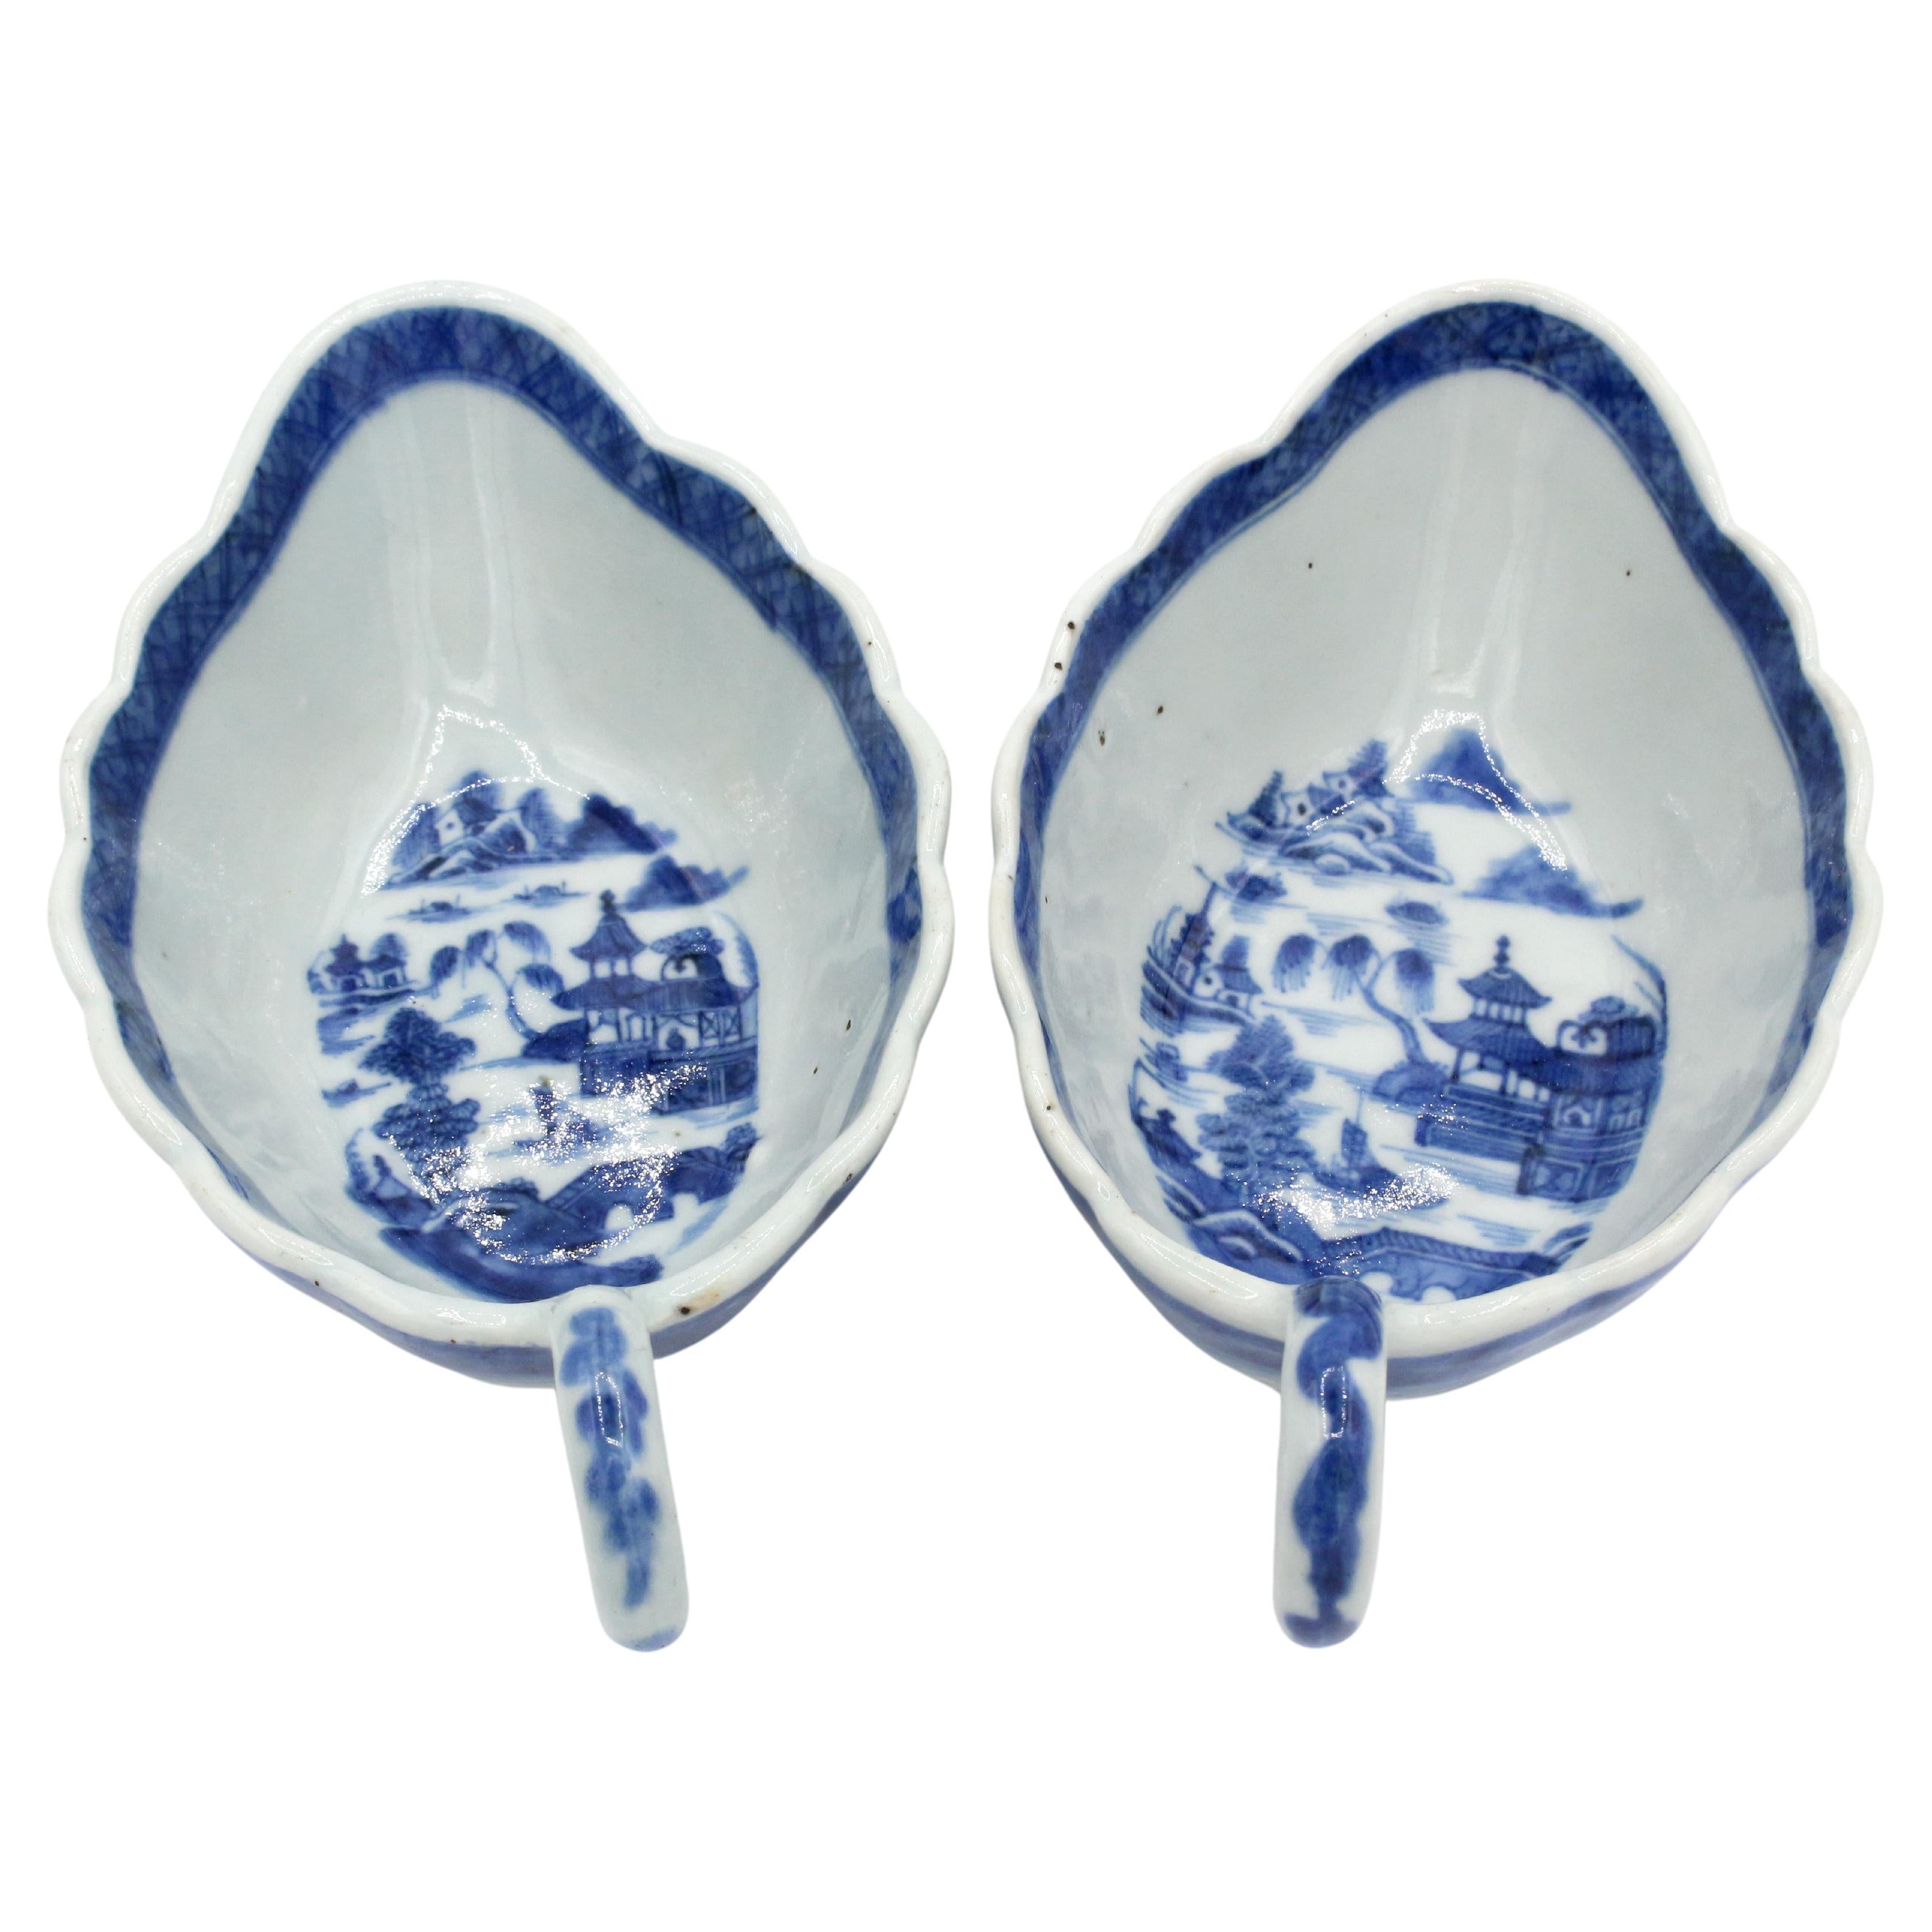 Circa 1830s Pair of Chinese Blue Canton Sauce Boats